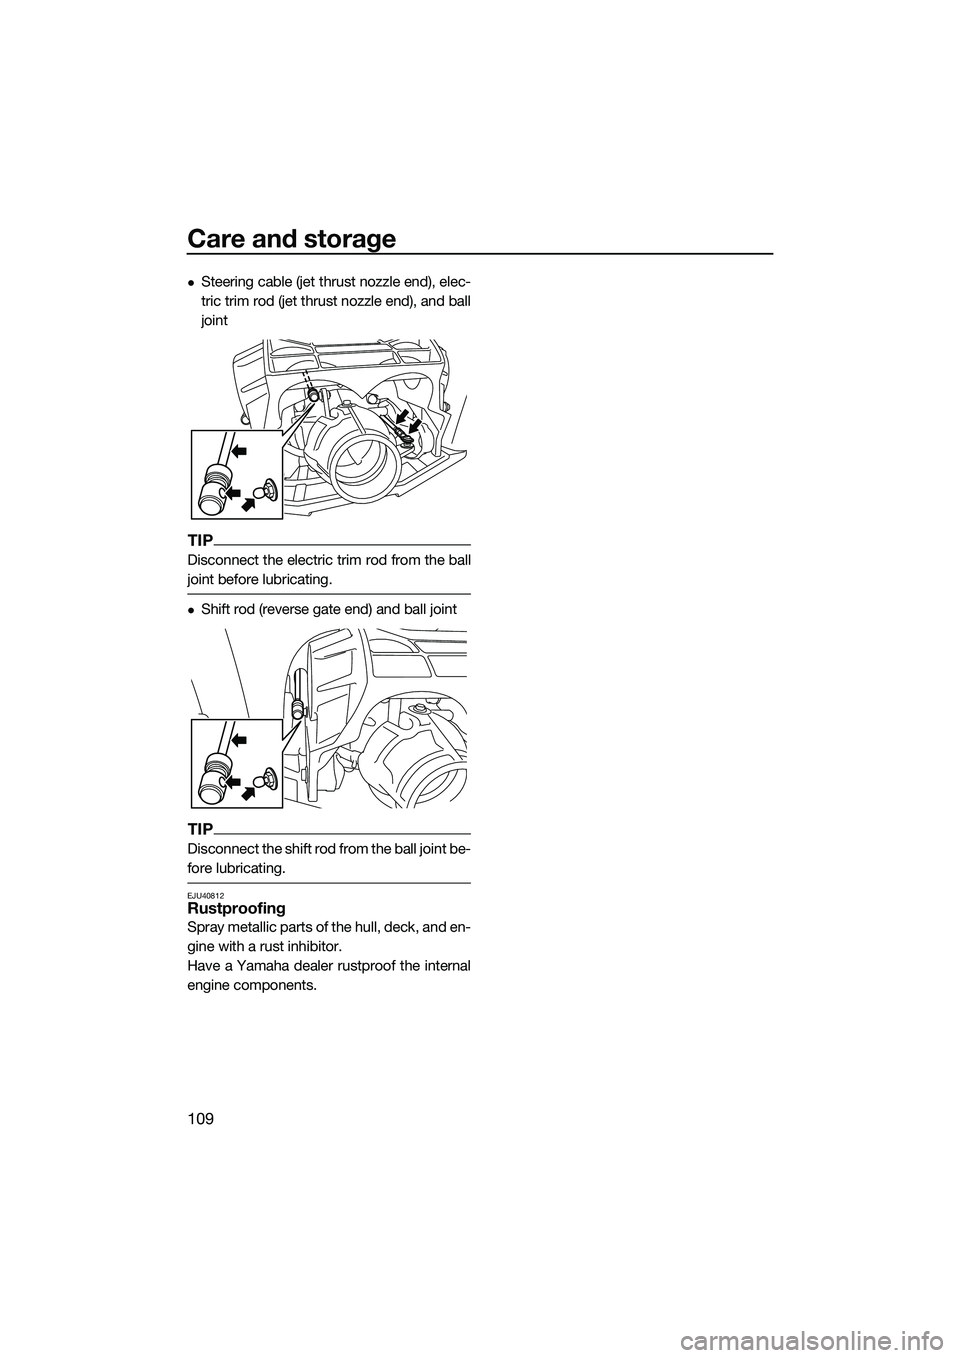 YAMAHA FX HO CRUISER 2022  Owners Manual Care and storage
109
Steering cable (jet thrust nozzle end), elec-
tric trim rod (jet thrust nozzle end), and ball
joint
TIP
Disconnect the electric trim rod from the ball
joint before lubricating.